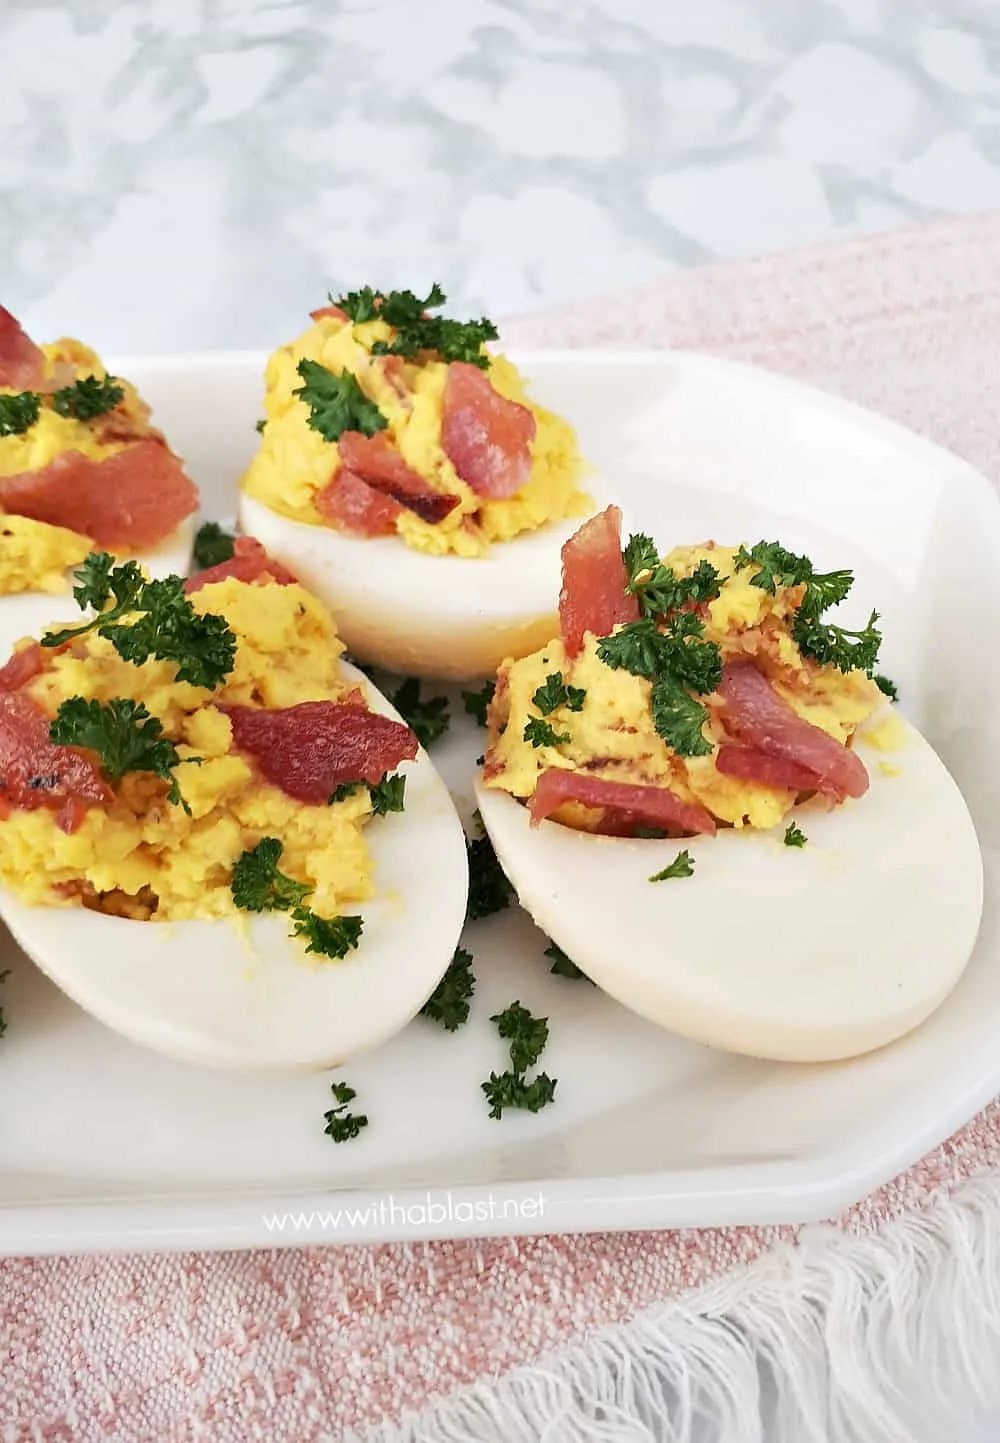 These Honey-Bacon and Cheese Deviled Eggs with a salty-sweet taste are made in a flash and a must have snack for savory platters - parties, Game day etc